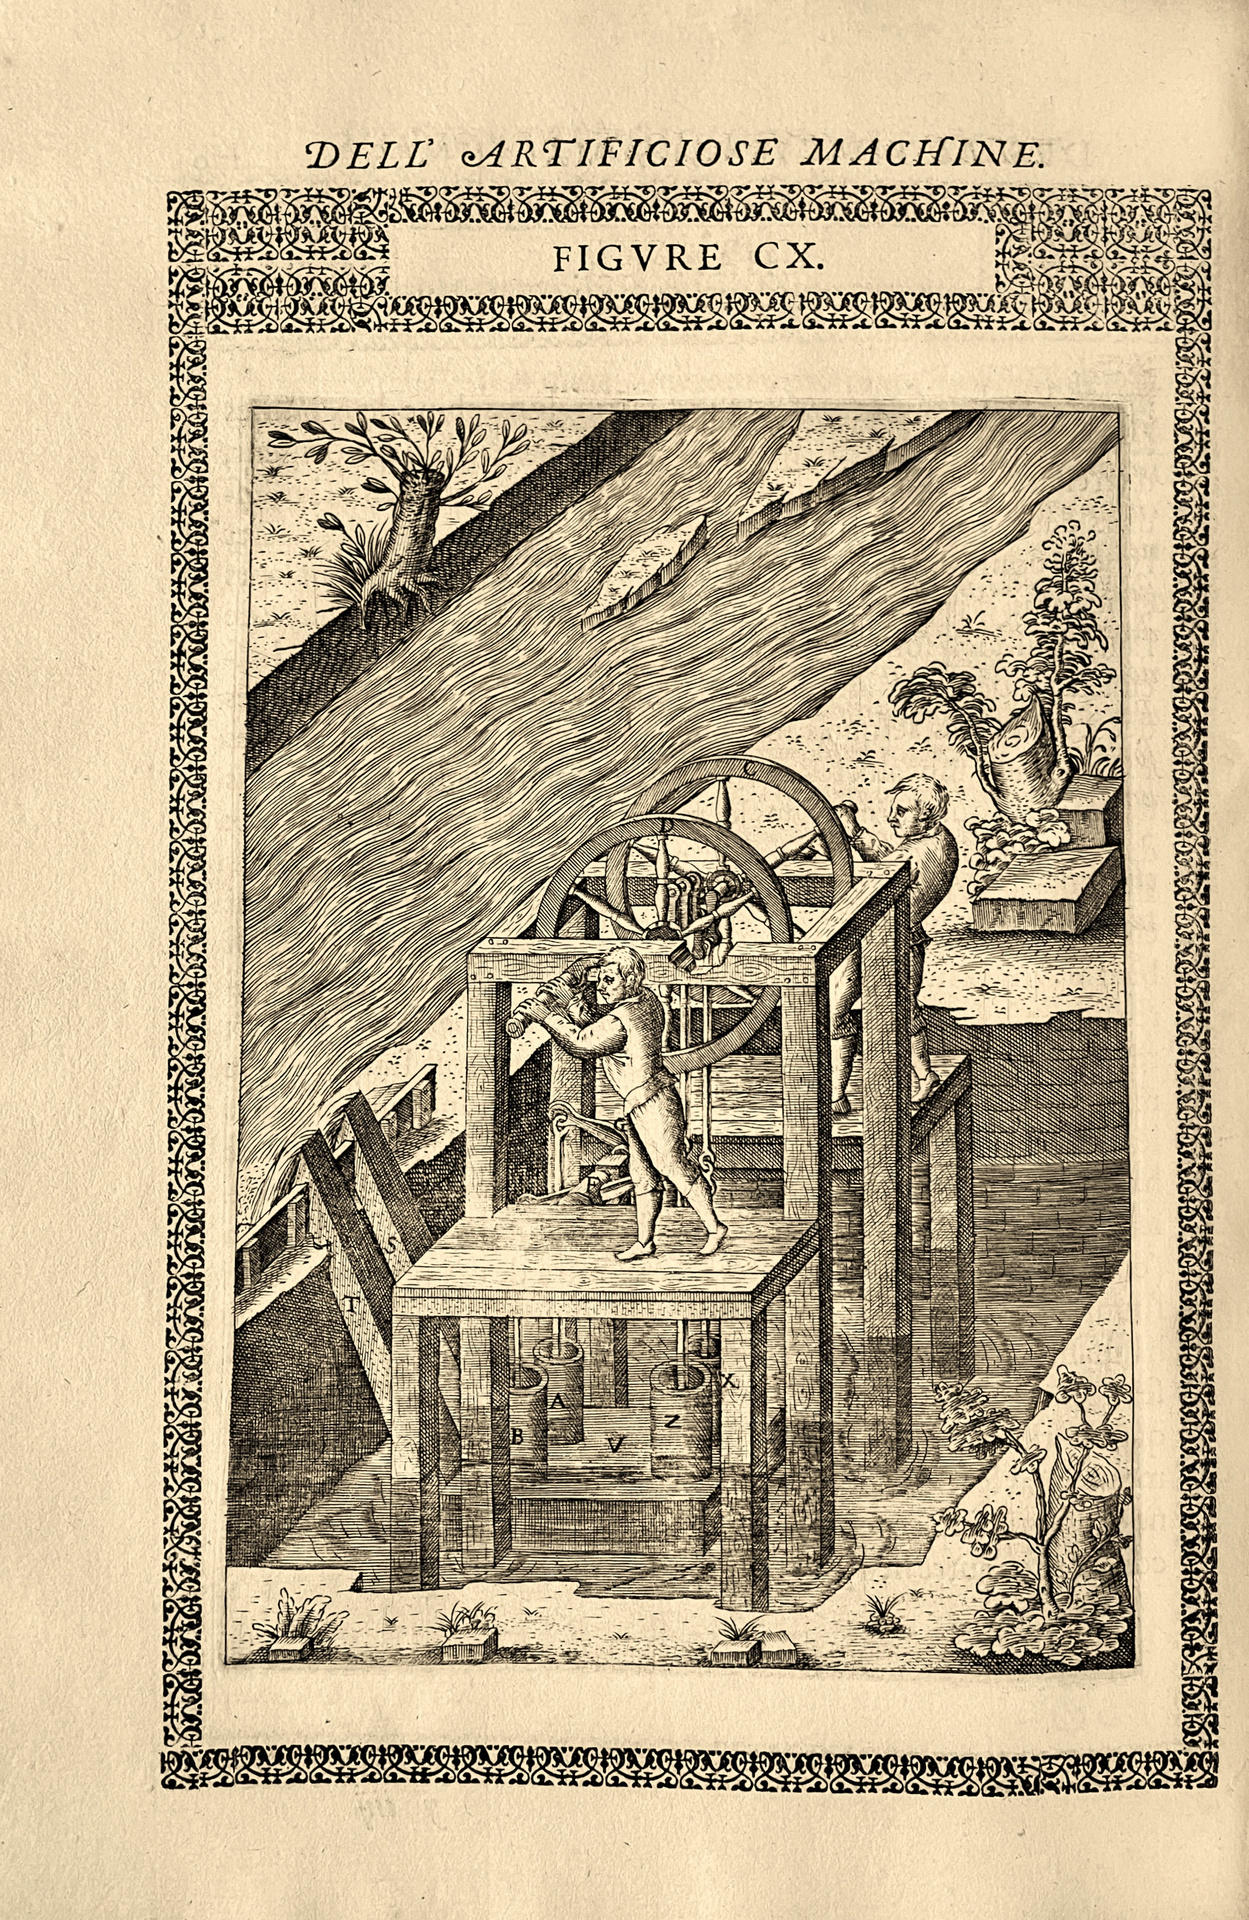 A Crane, illustration from Diverse Imaginary Machines by Agostino Ramelli,  published in Paris in 1588 (copper plate engraving)